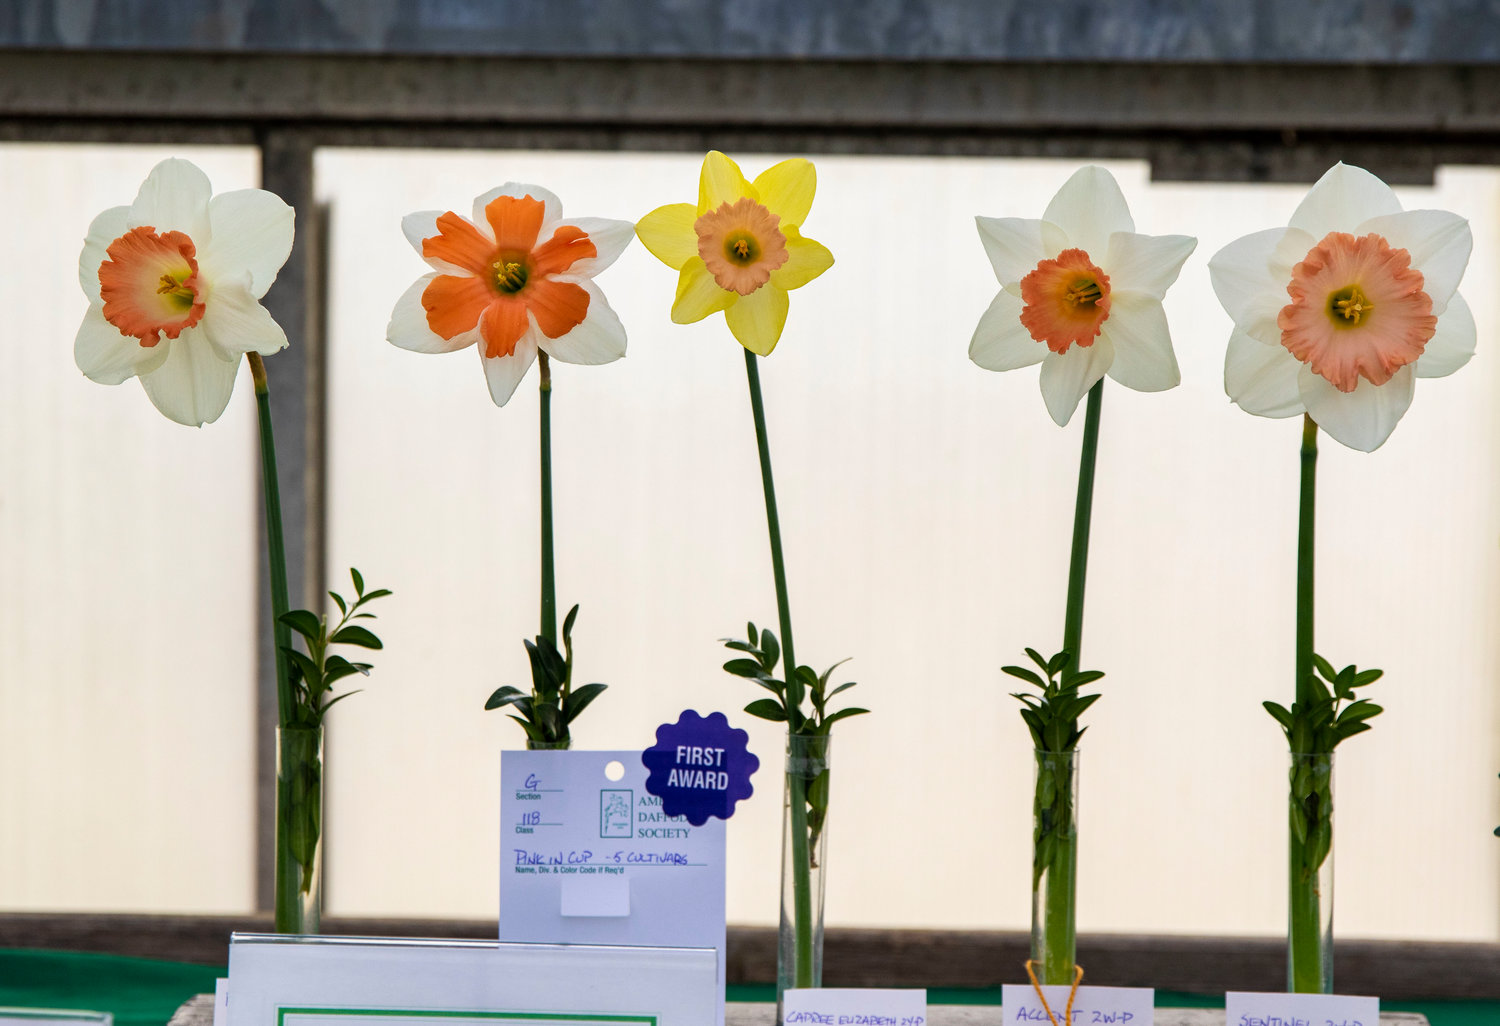 Single stems on display at the 2018 Nantucket Daffodil Flower Show at Bartlett's Ocean View Farm.